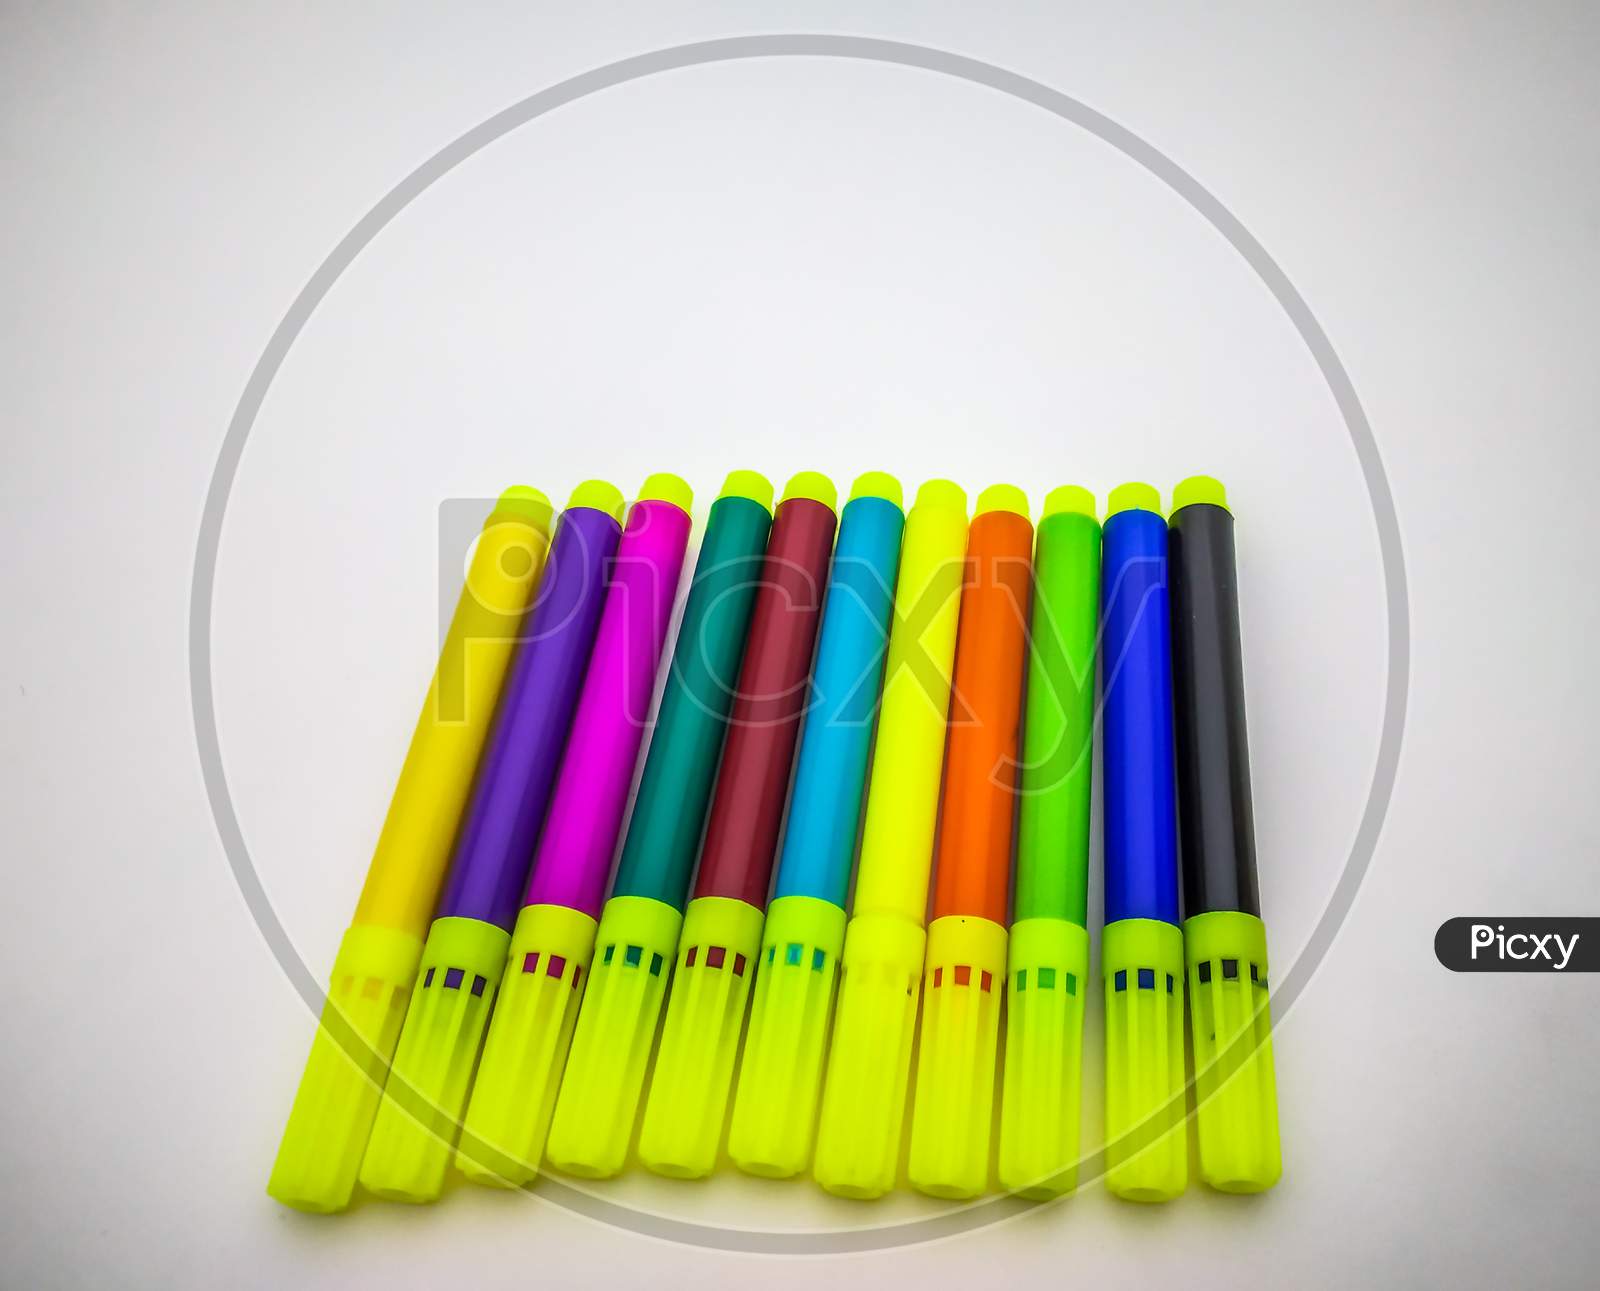 Pack Of Sketch Pens Isolated With White Background